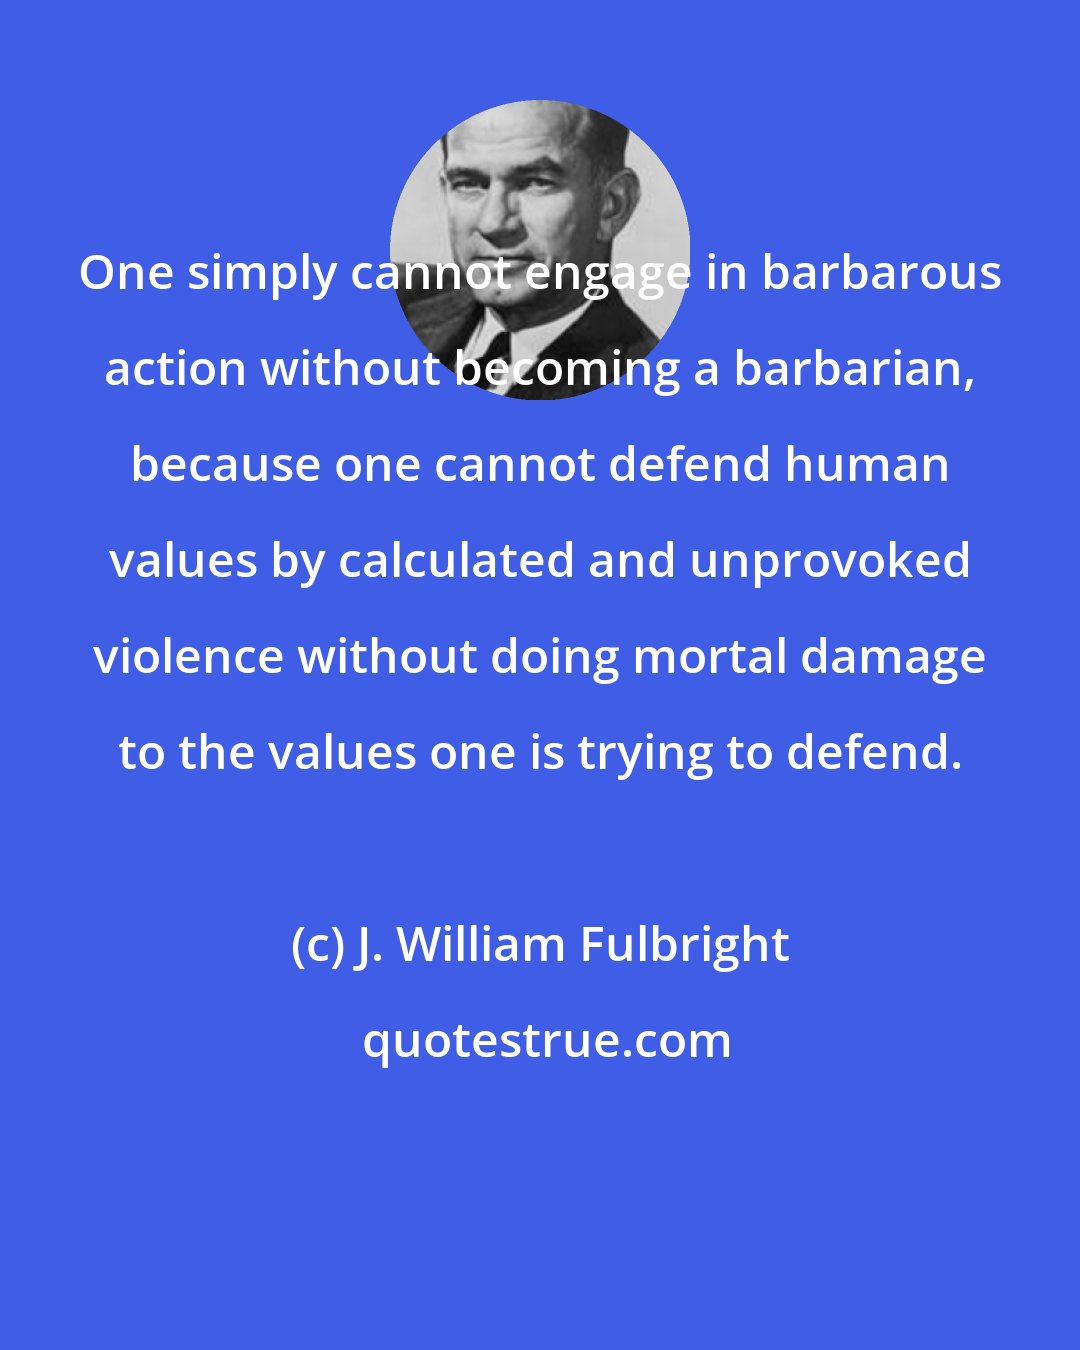 J. William Fulbright: One simply cannot engage in barbarous action without becoming a barbarian, because one cannot defend human values by calculated and unprovoked violence without doing mortal damage to the values one is trying to defend.